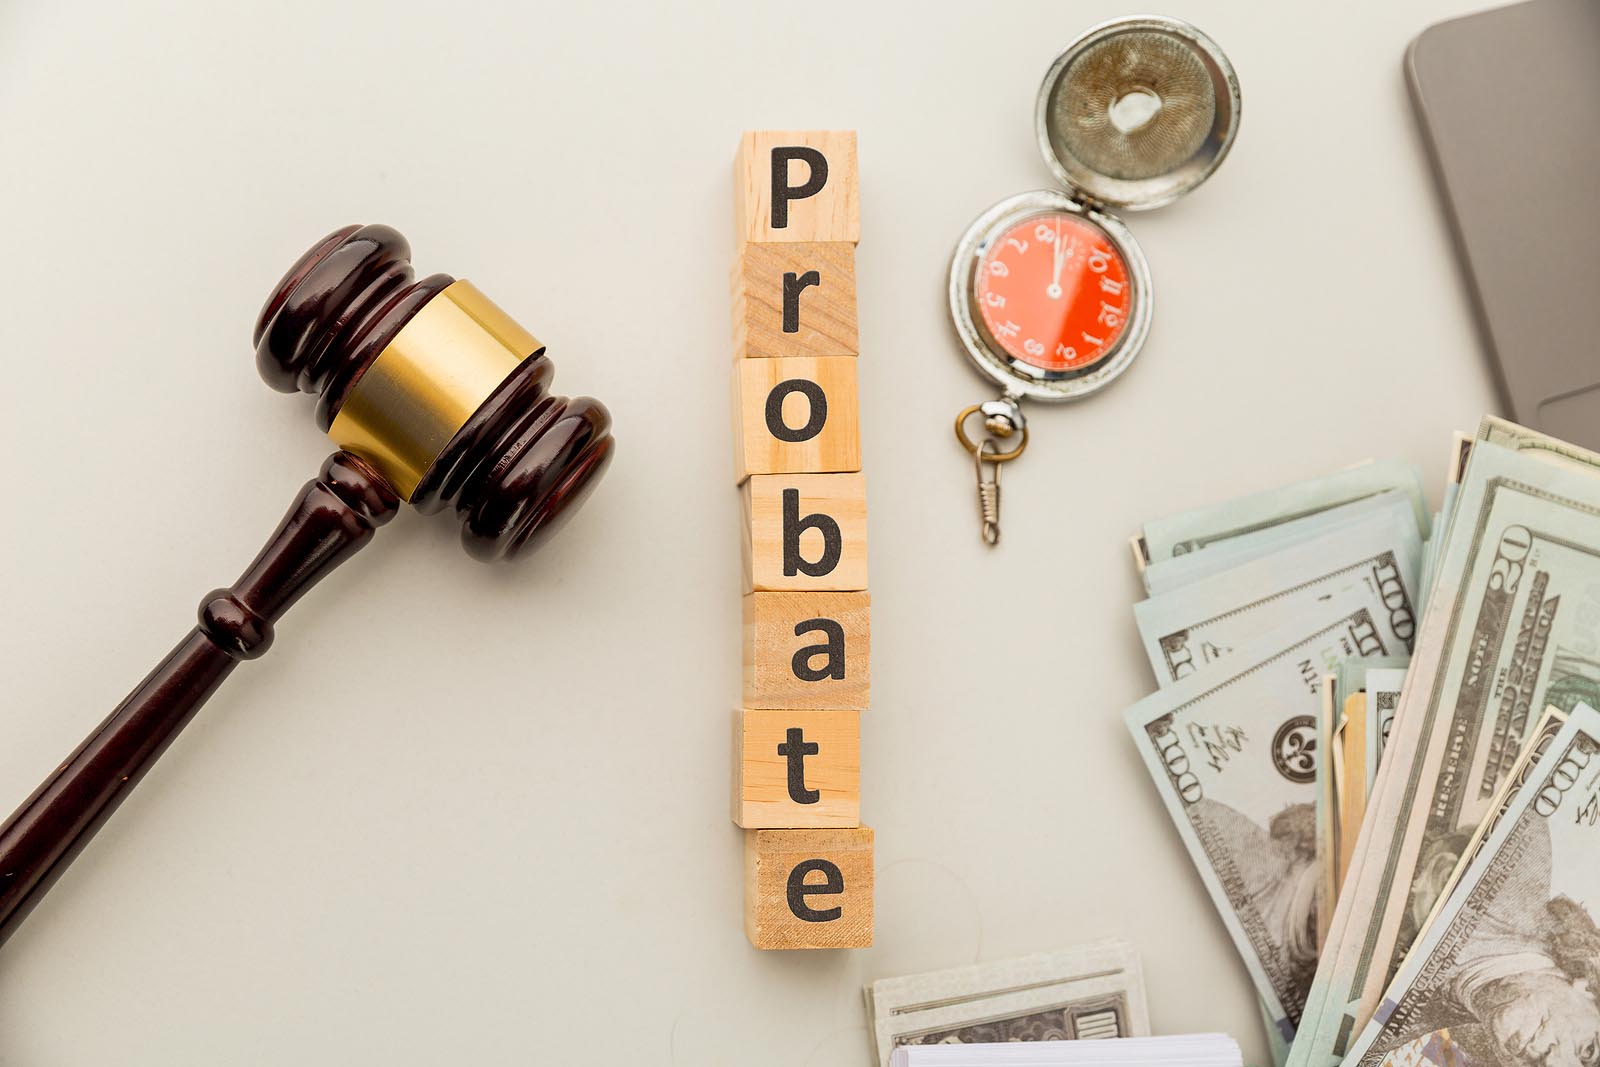 Probate vs. Non-Probate Assets: What You Need to Know